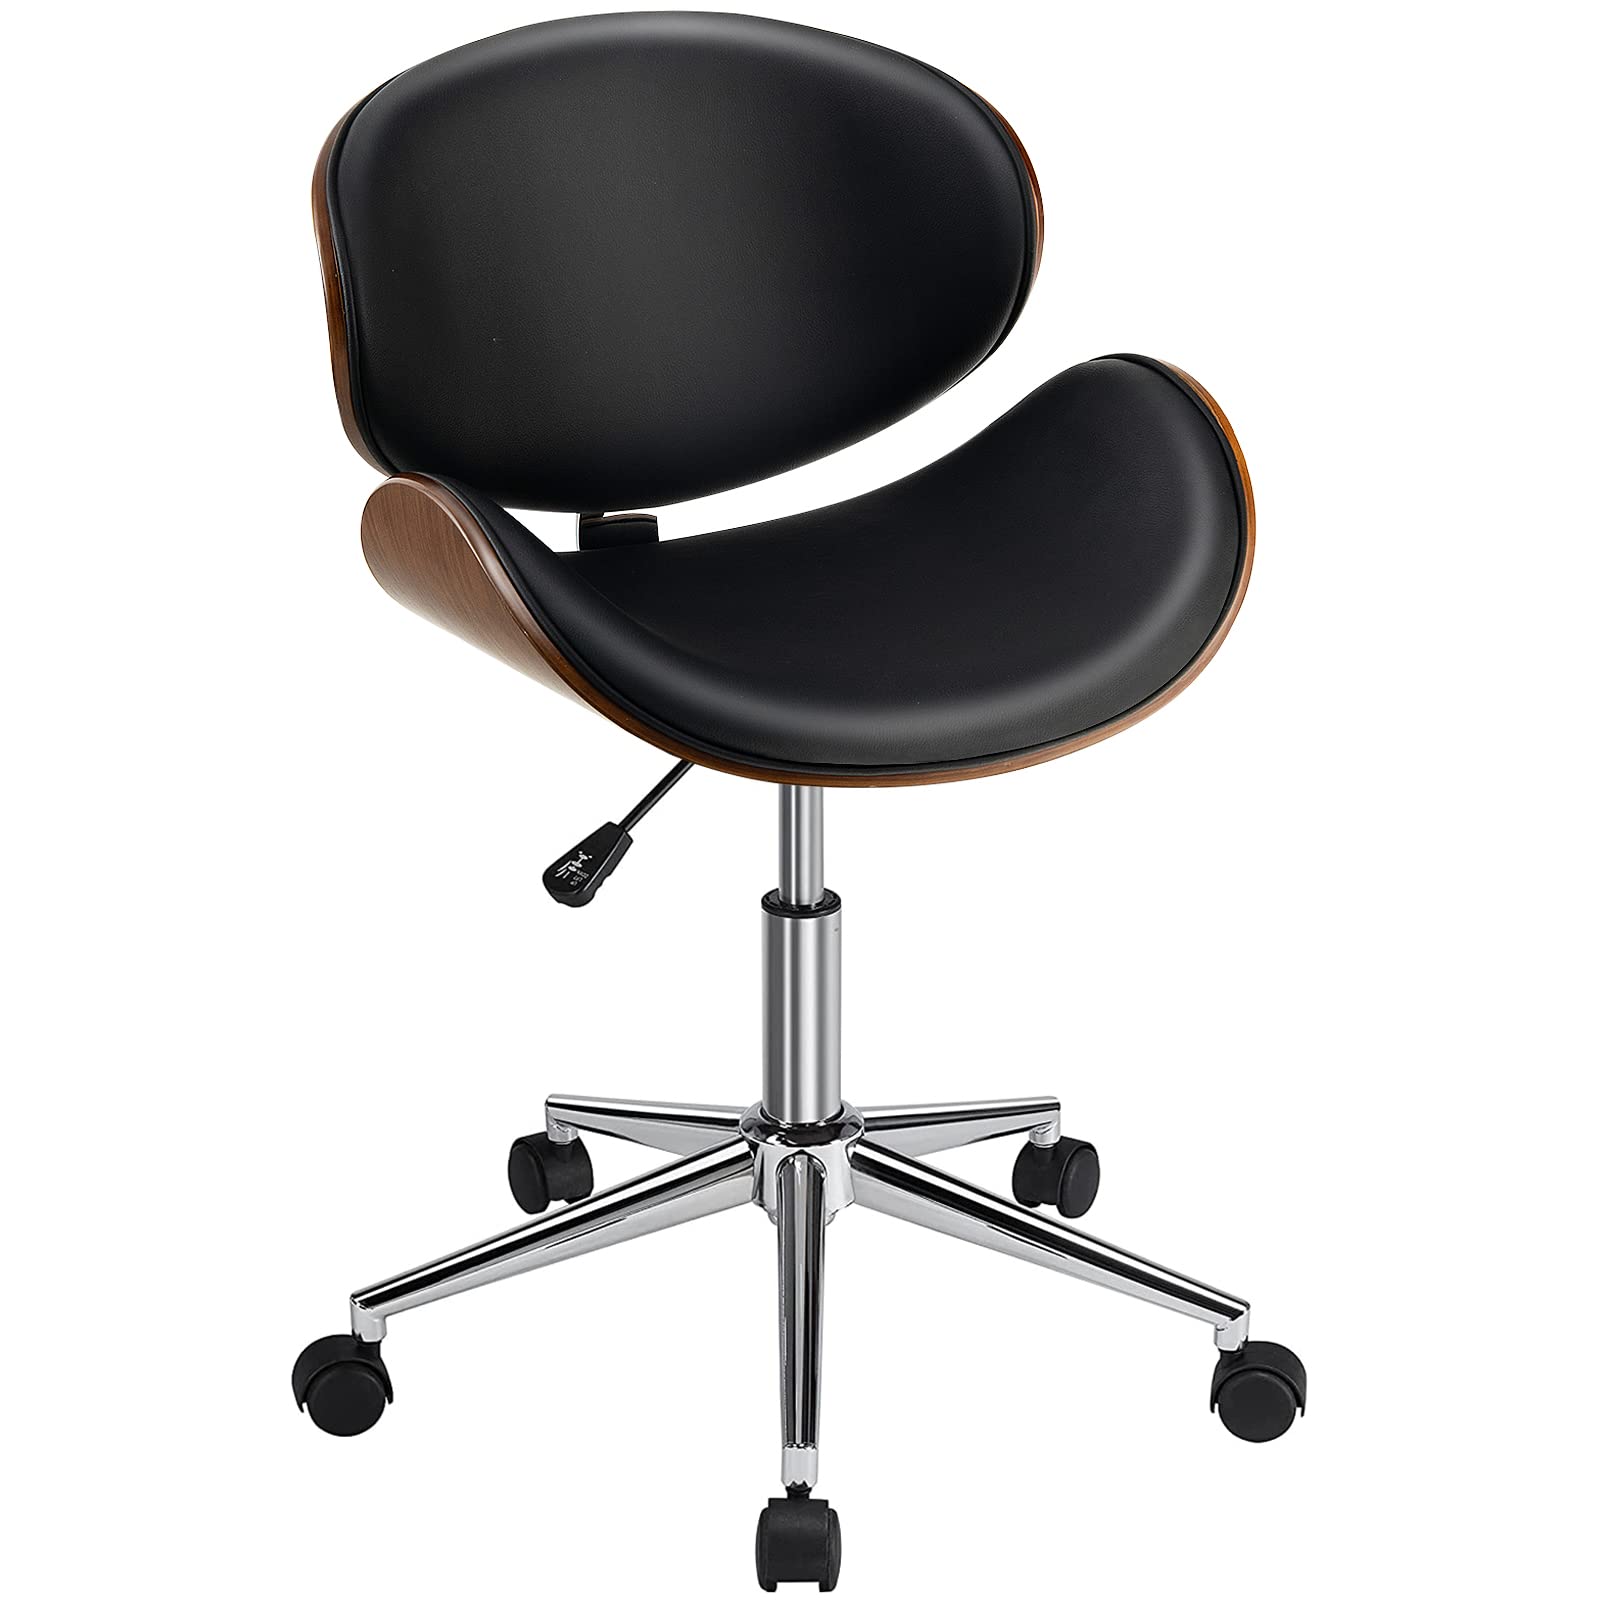 Giantex Home Office Chair, Adjustable Swivel Vanity Chair with Wheels Wing Back Curved Bentwood Seat (Black)